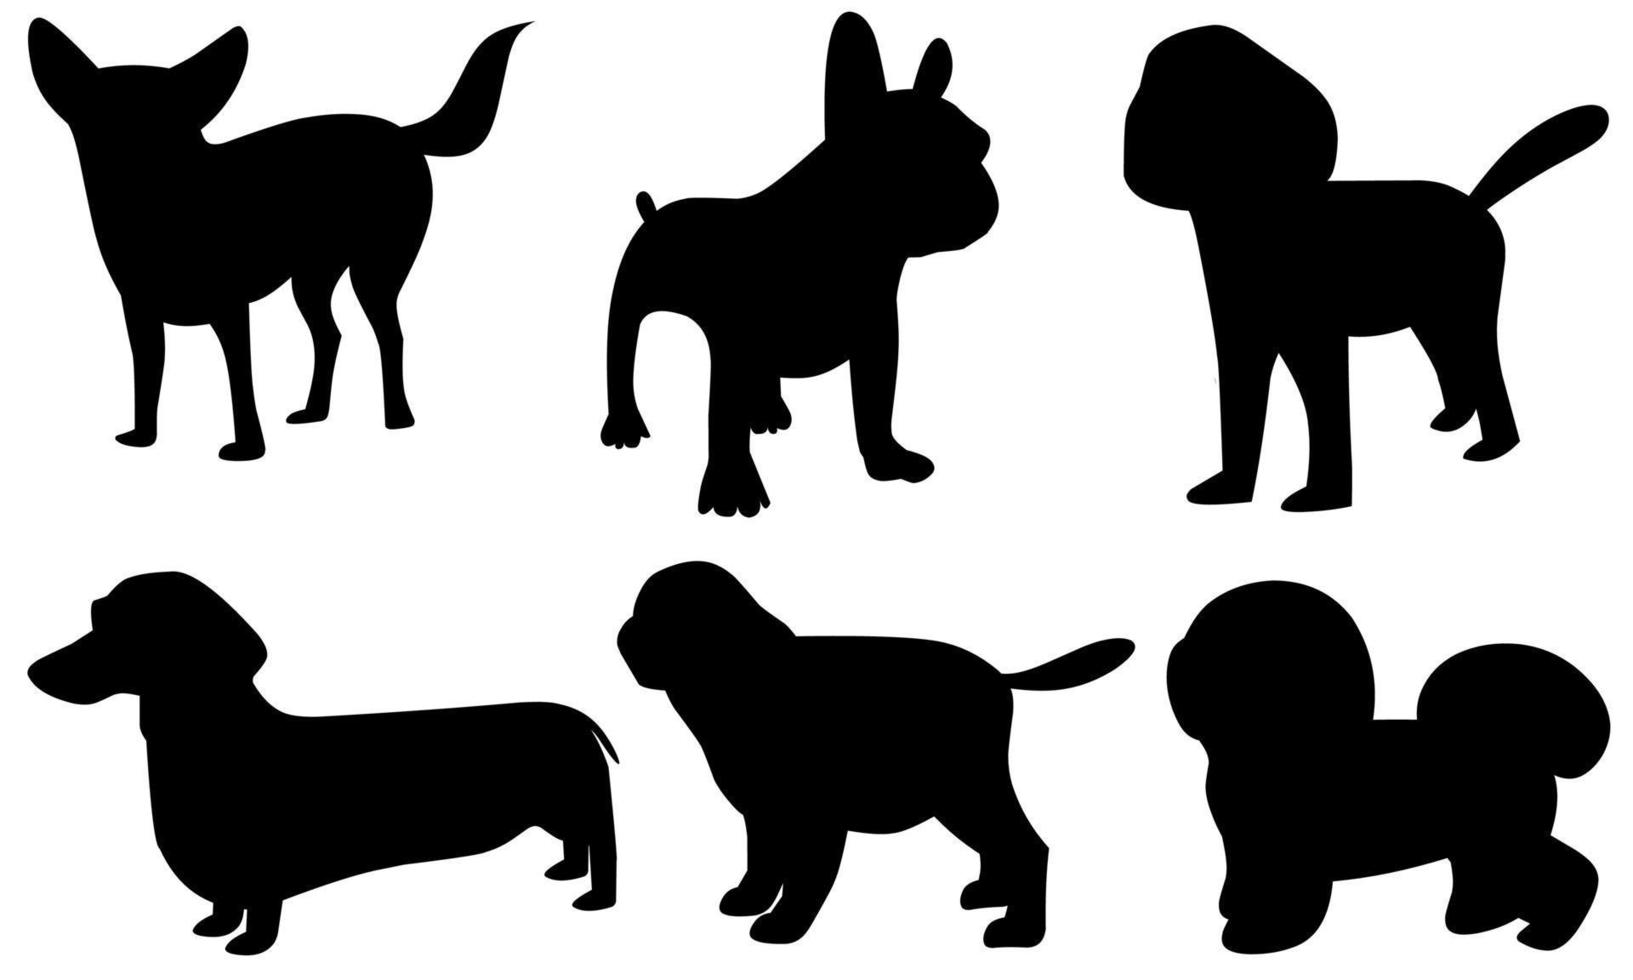 World's smallest dog silhouette collection. Pet symbol on white background. vector